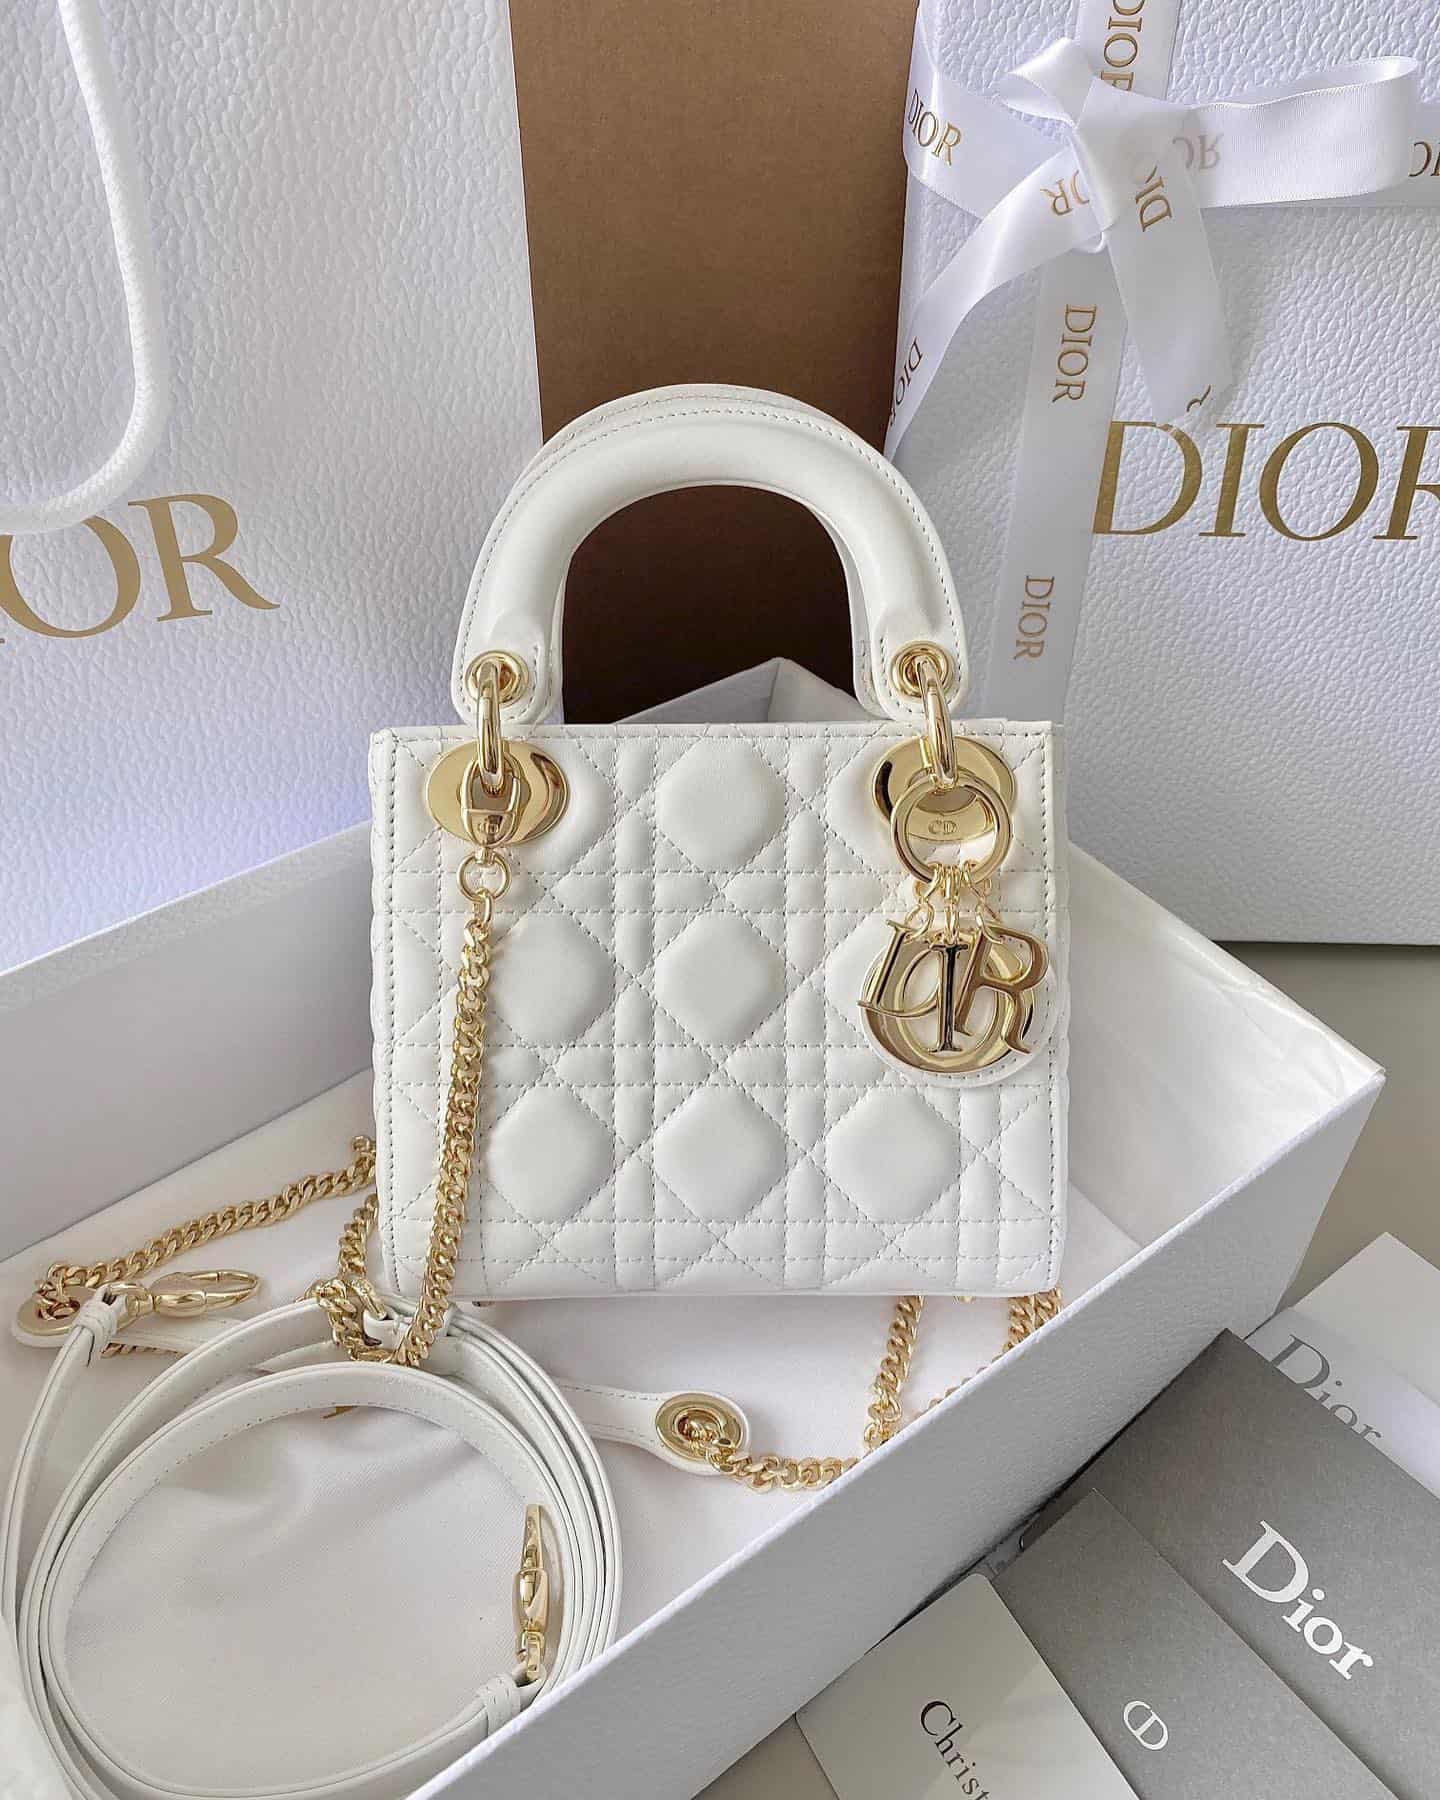 Reasons the Lady Dior bag is popular white lady dior bag